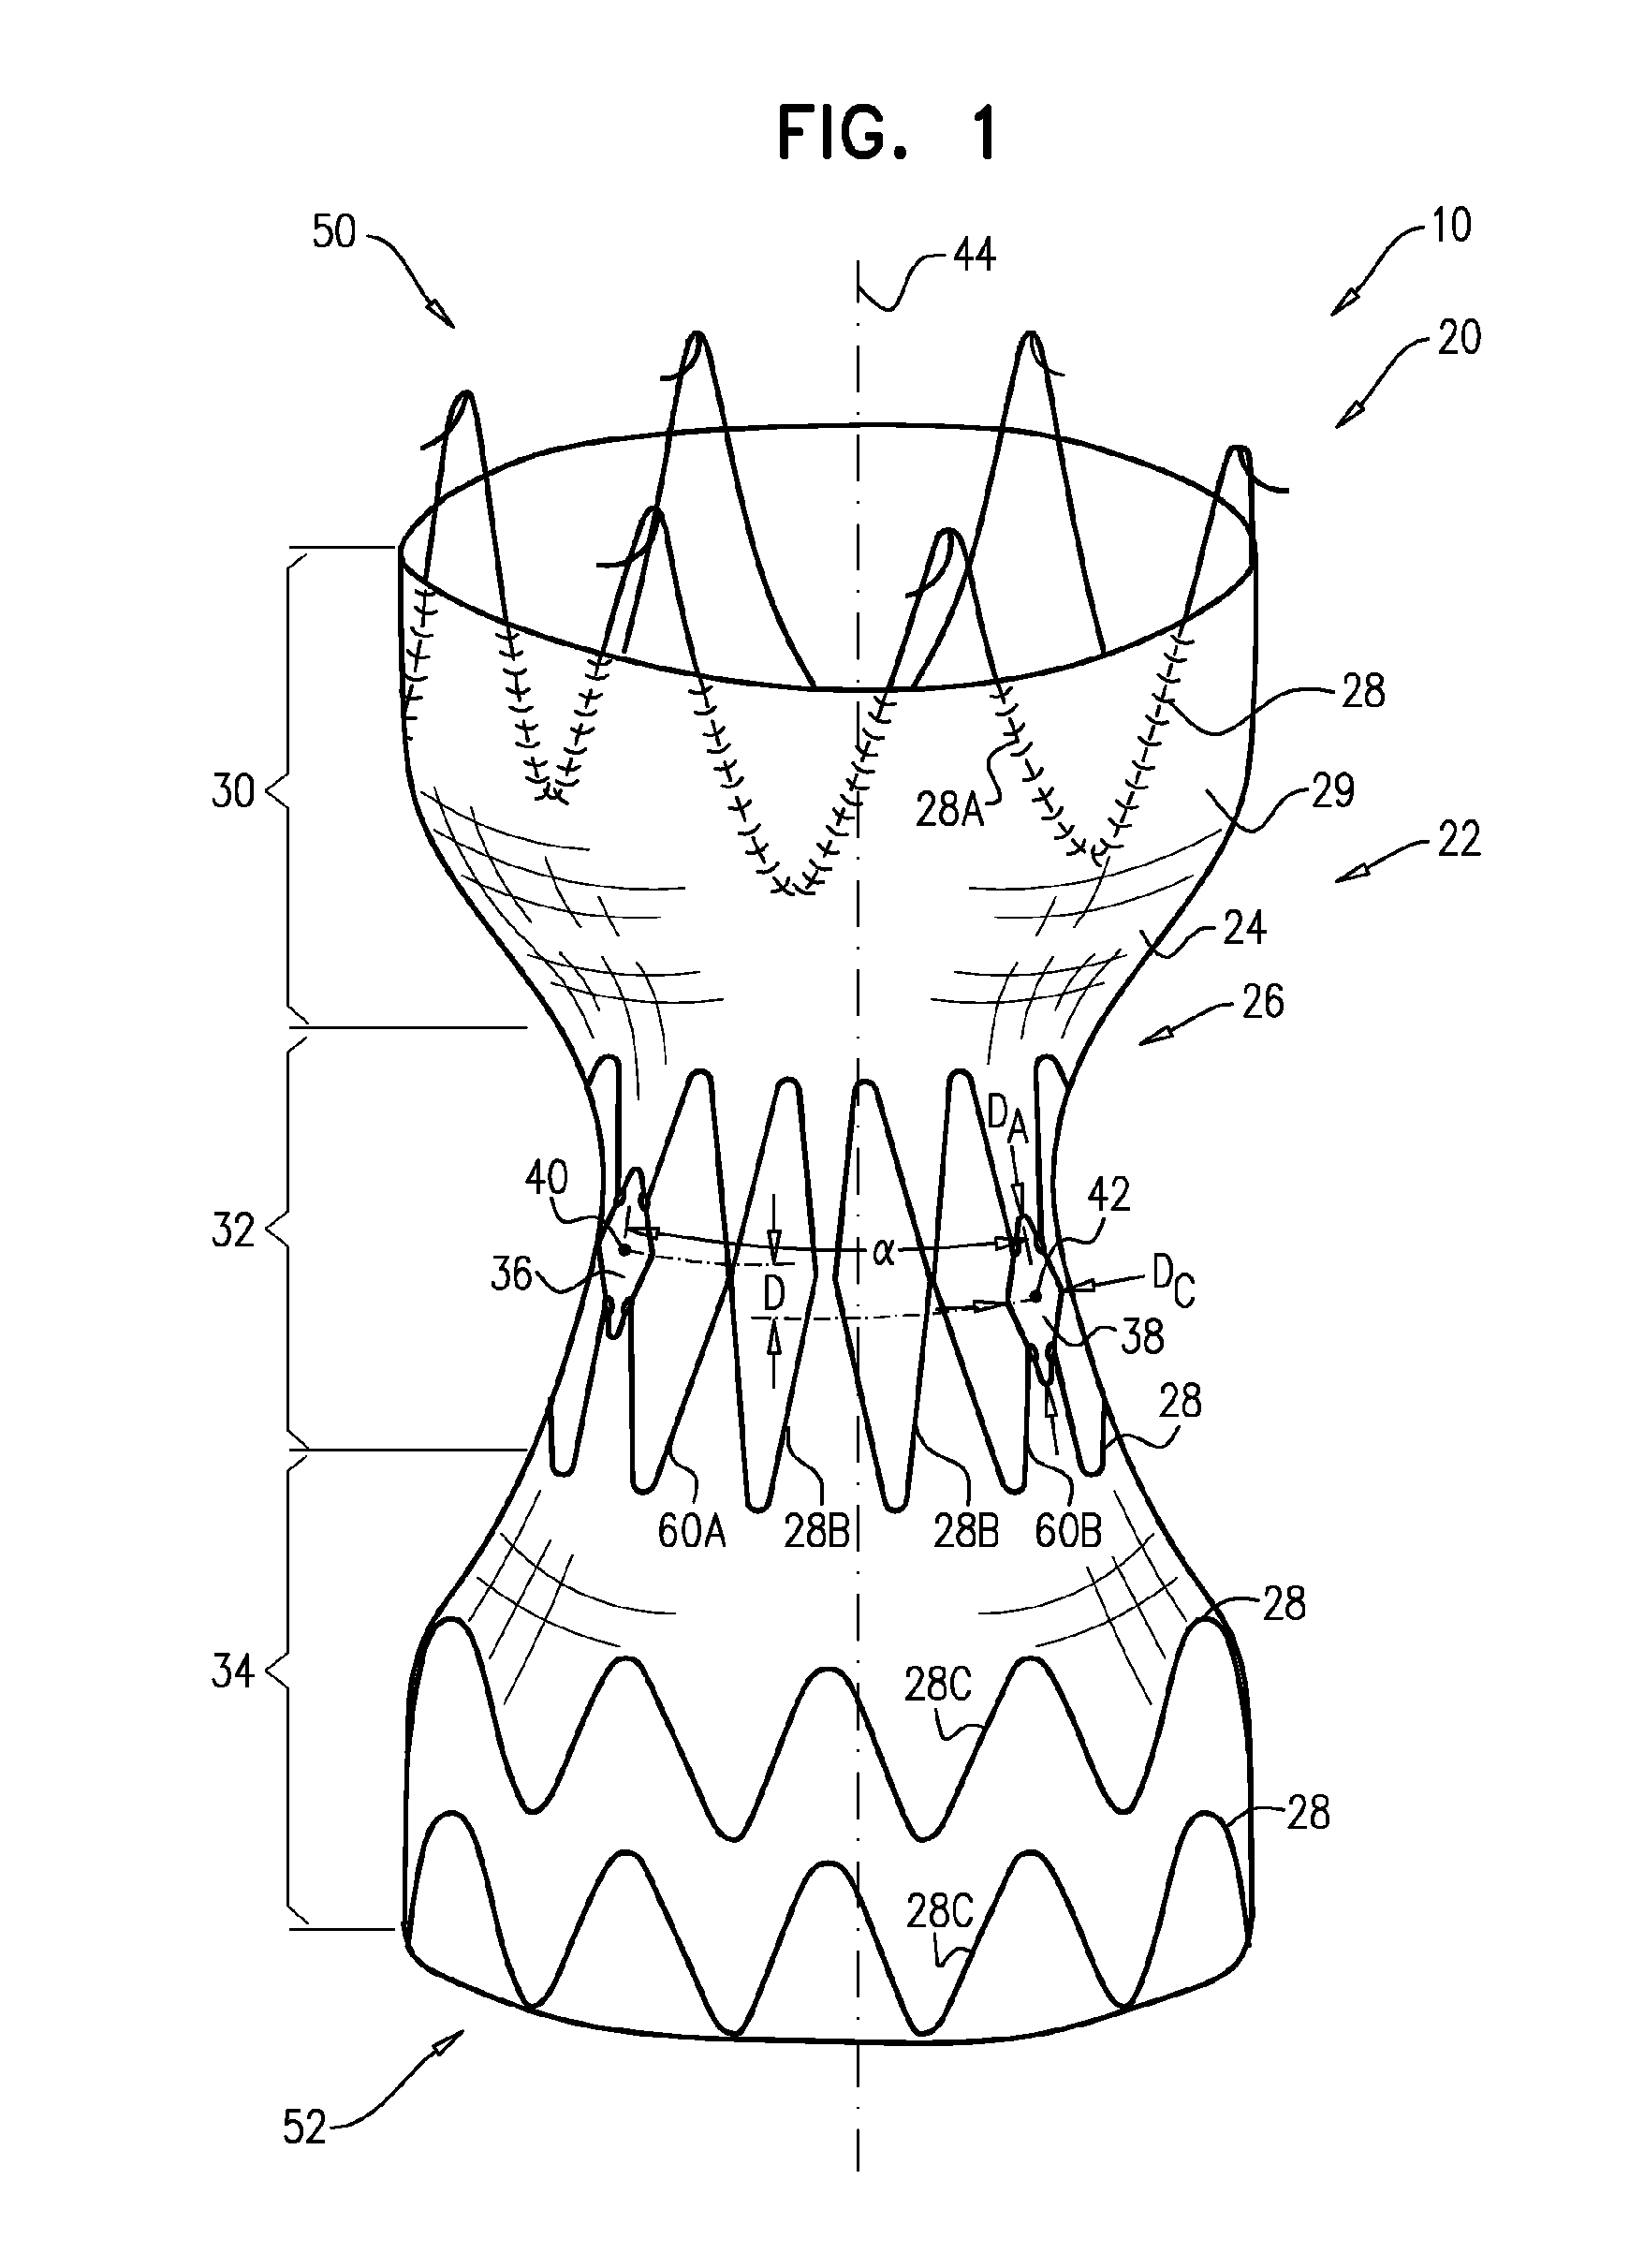 Branched stent-graft system